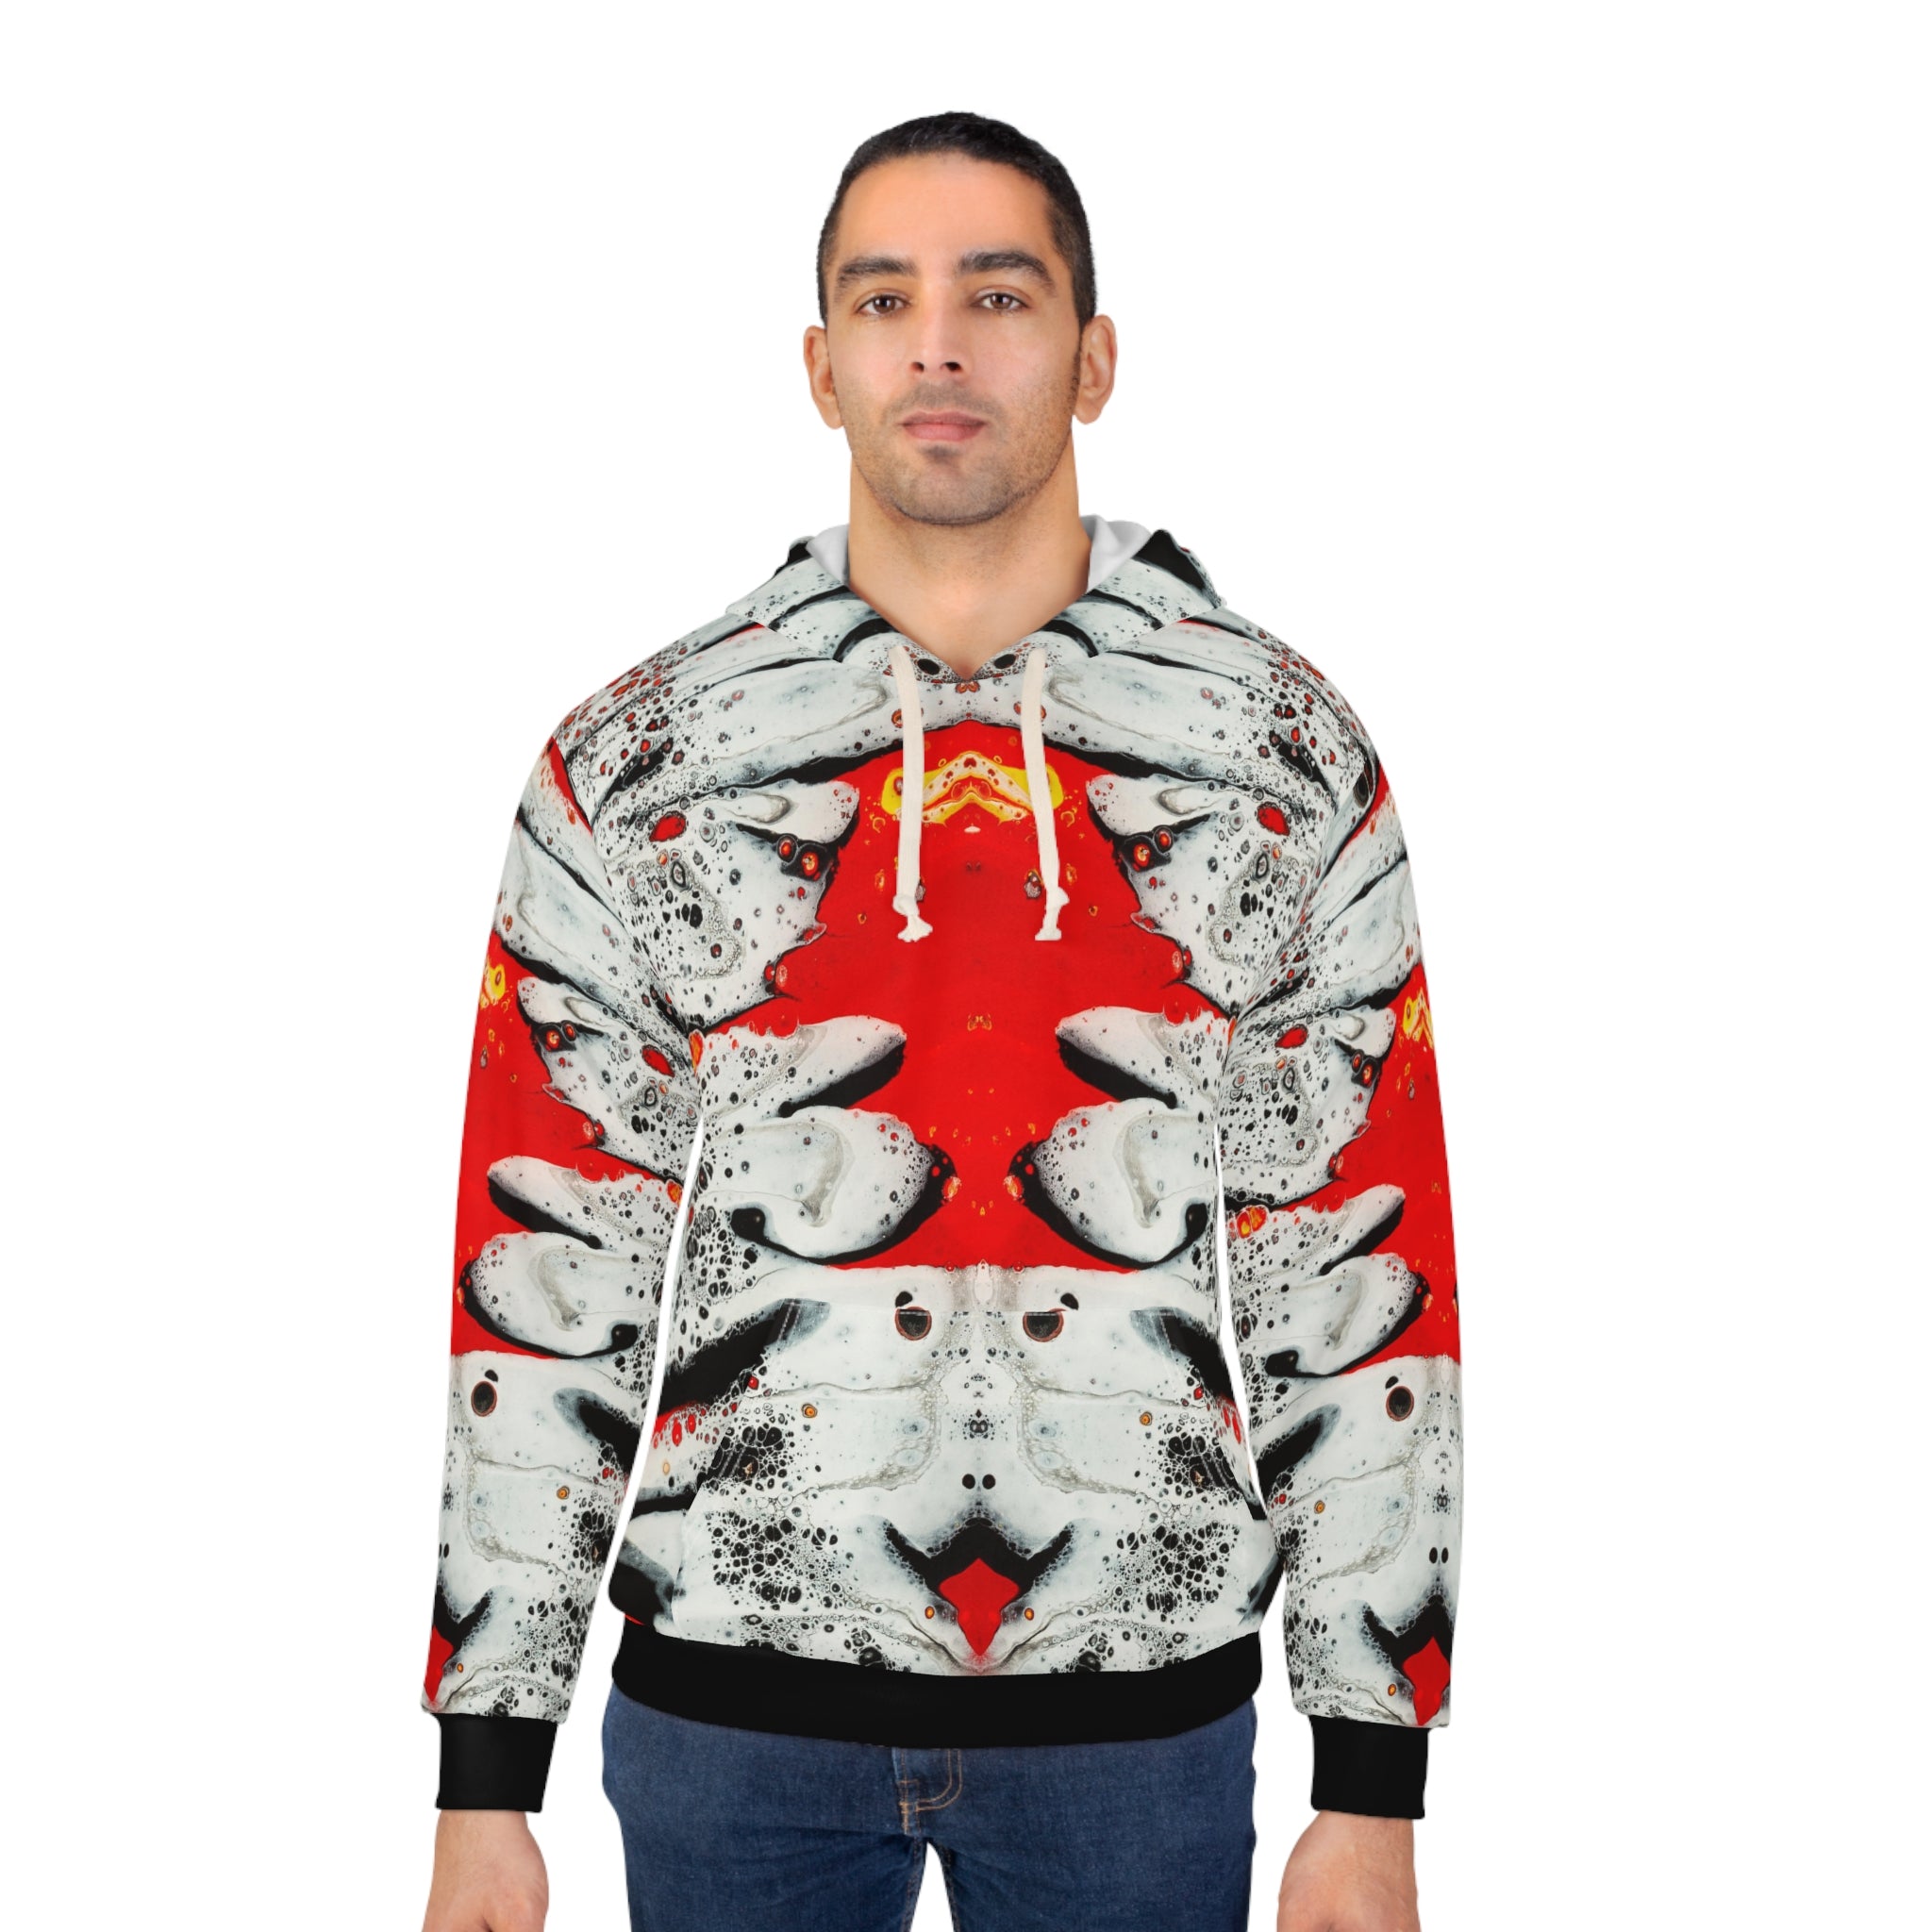 Cameron Creations - Galactic Graffiti - Pullover Hoodie - Male